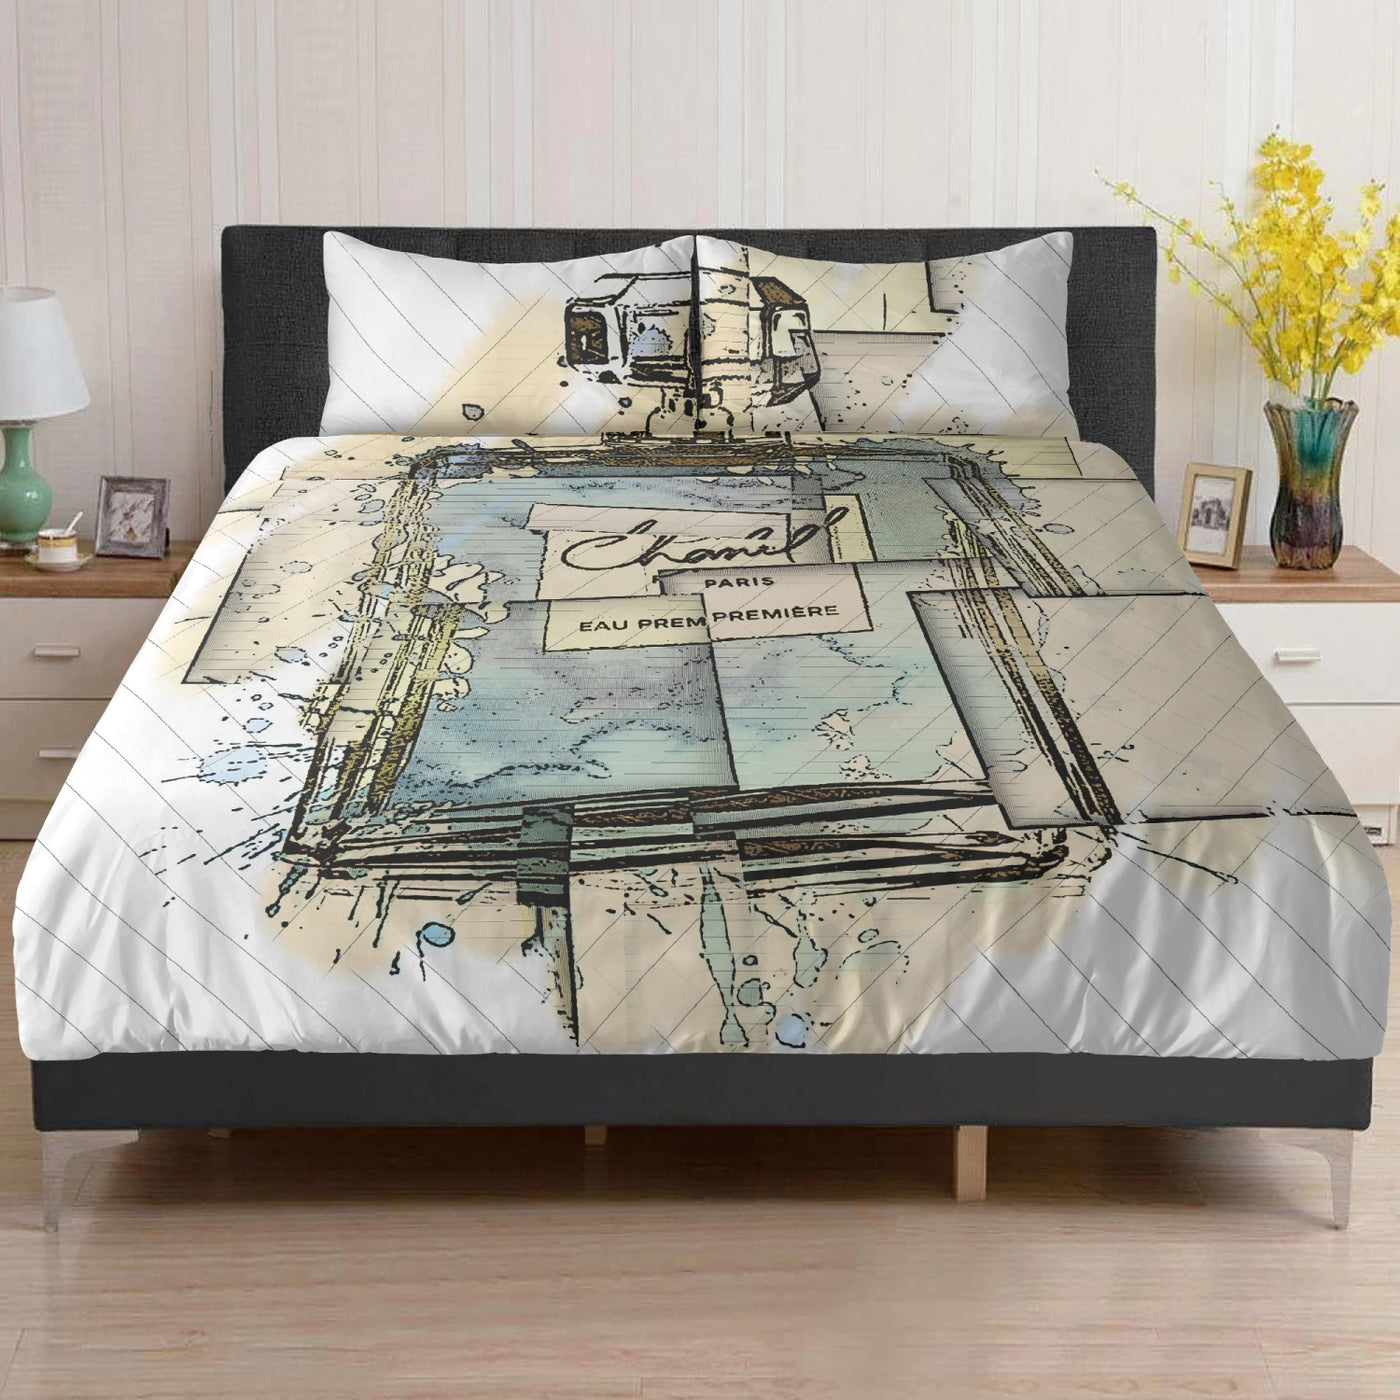 Chanel Paris 3in1 Polyester Bedding Set